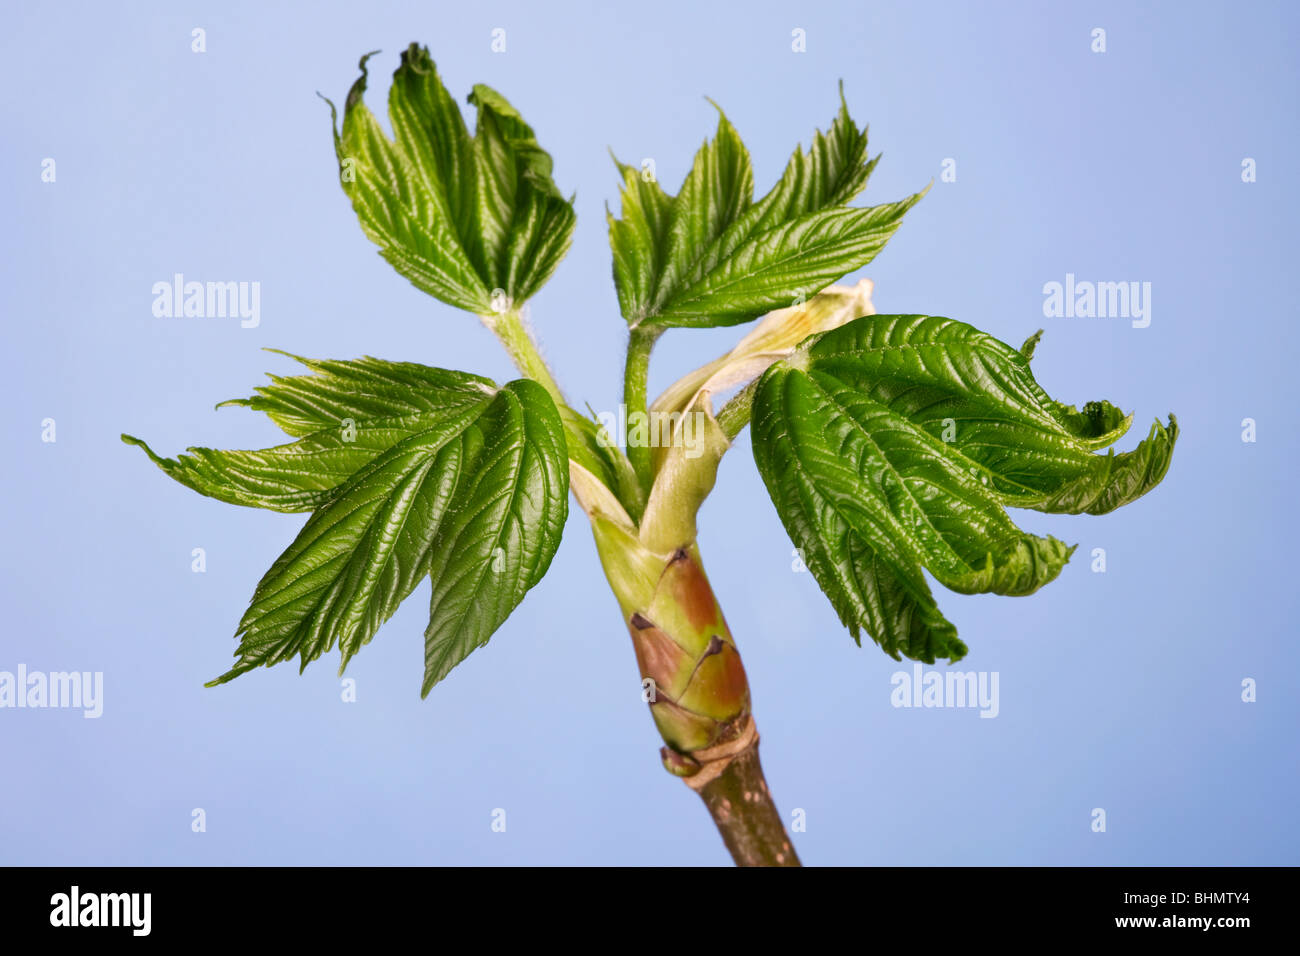 Sycamore Maple (Acer pseudoplatanus) bud with new leaves Stock Photo